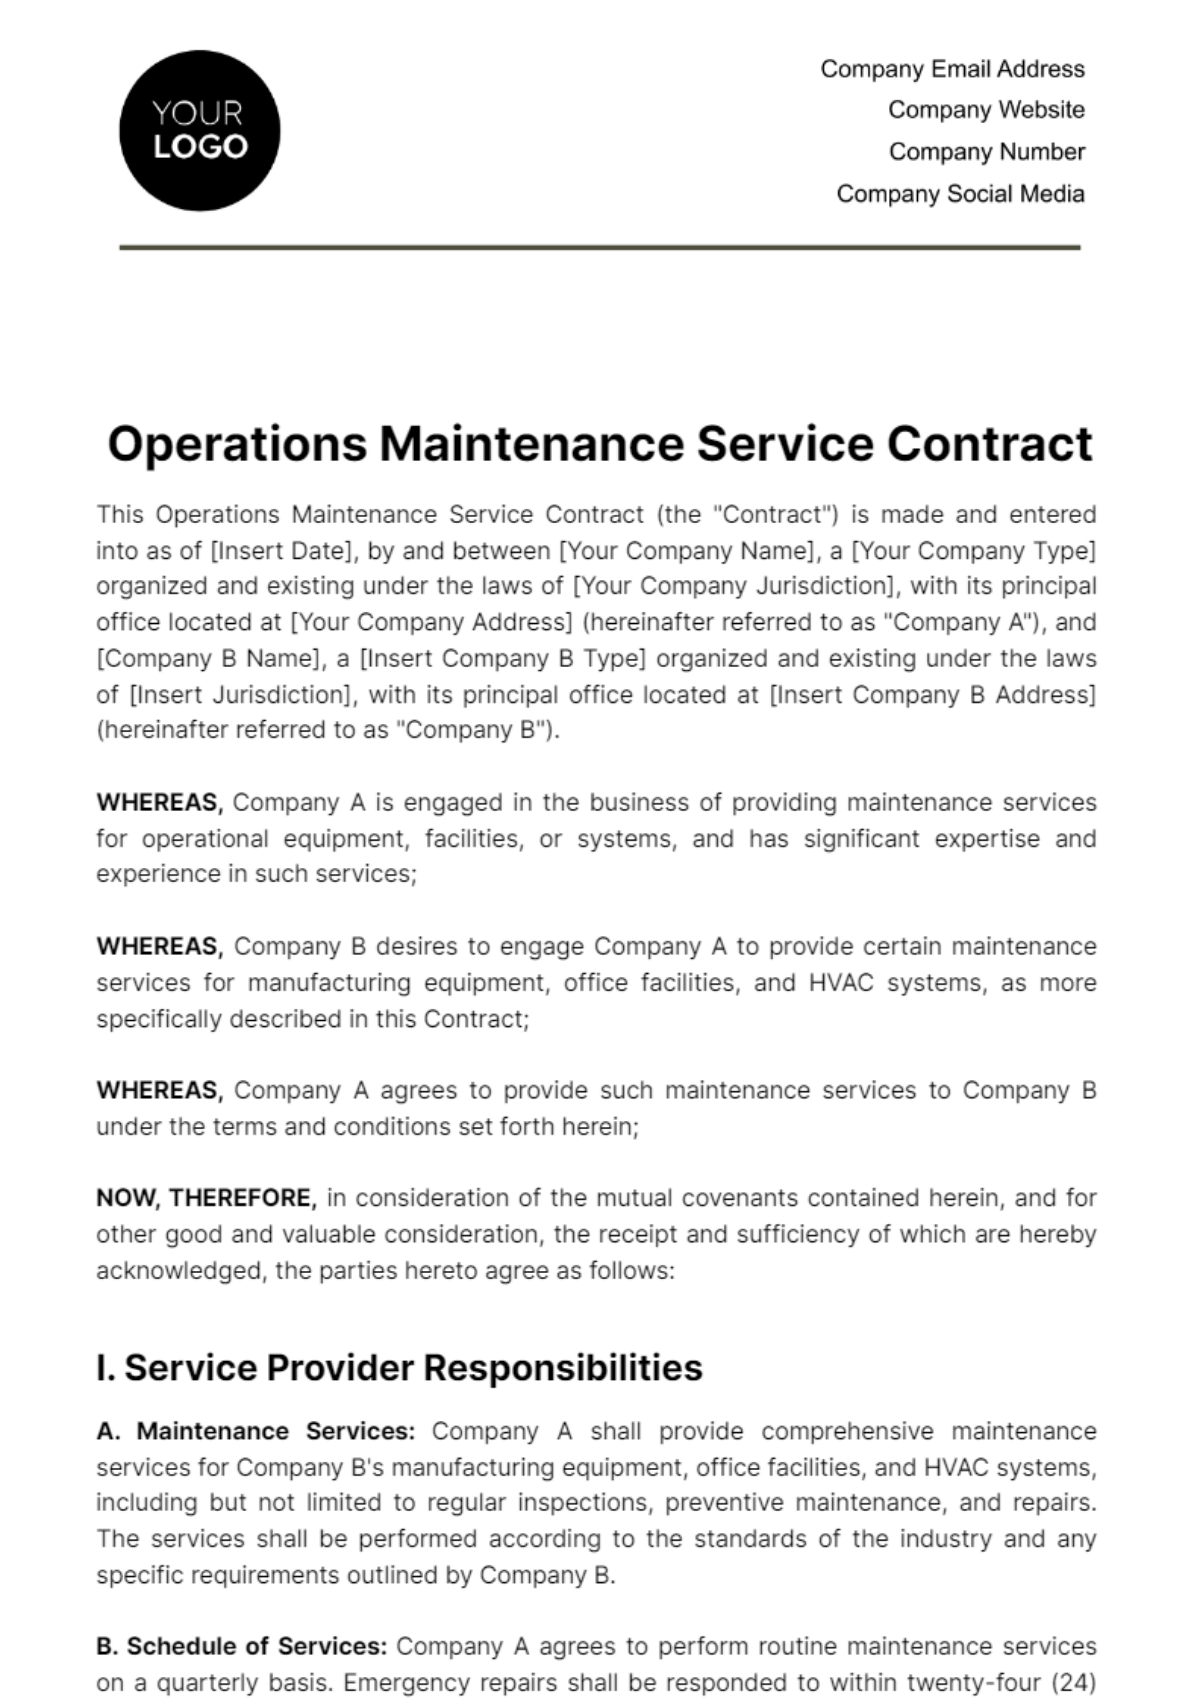 Free Operations Maintenance Service Contract Template